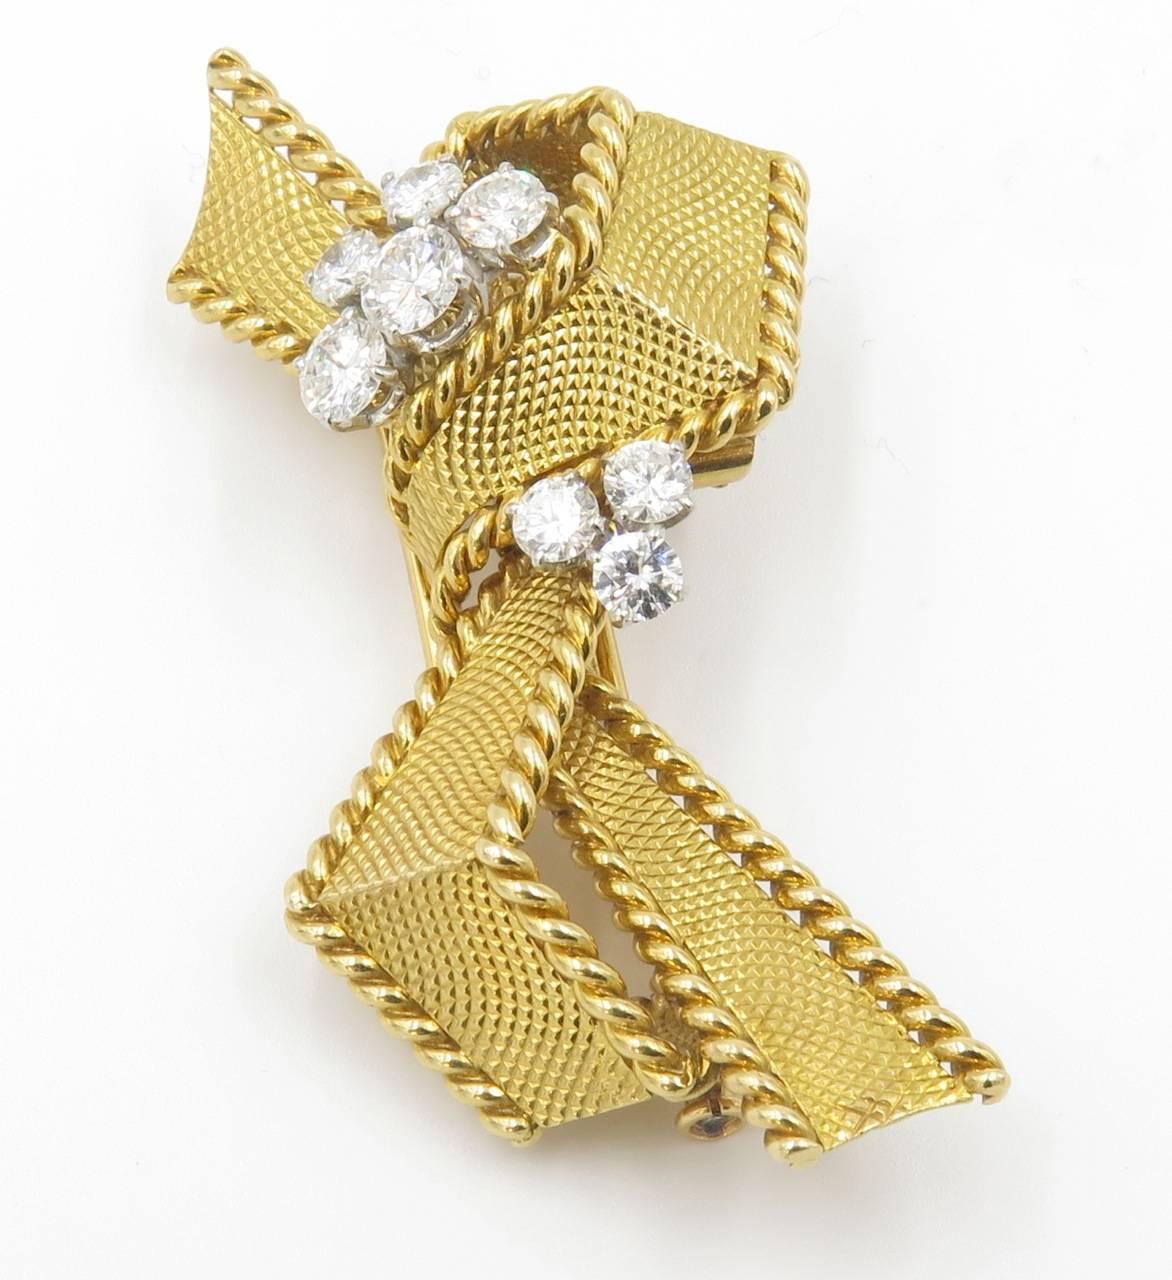 An 18 karat yellow gold and diamond brooch, Mauboussin, Paris. Circa 1950. Designed as a textured gold ribbon, enhanced by round brilliant-cut diamonds. eight (8) diamonds weigh approximately 2.00 carats, G/H color, VS-SI clarity. Signed Mauboussin,